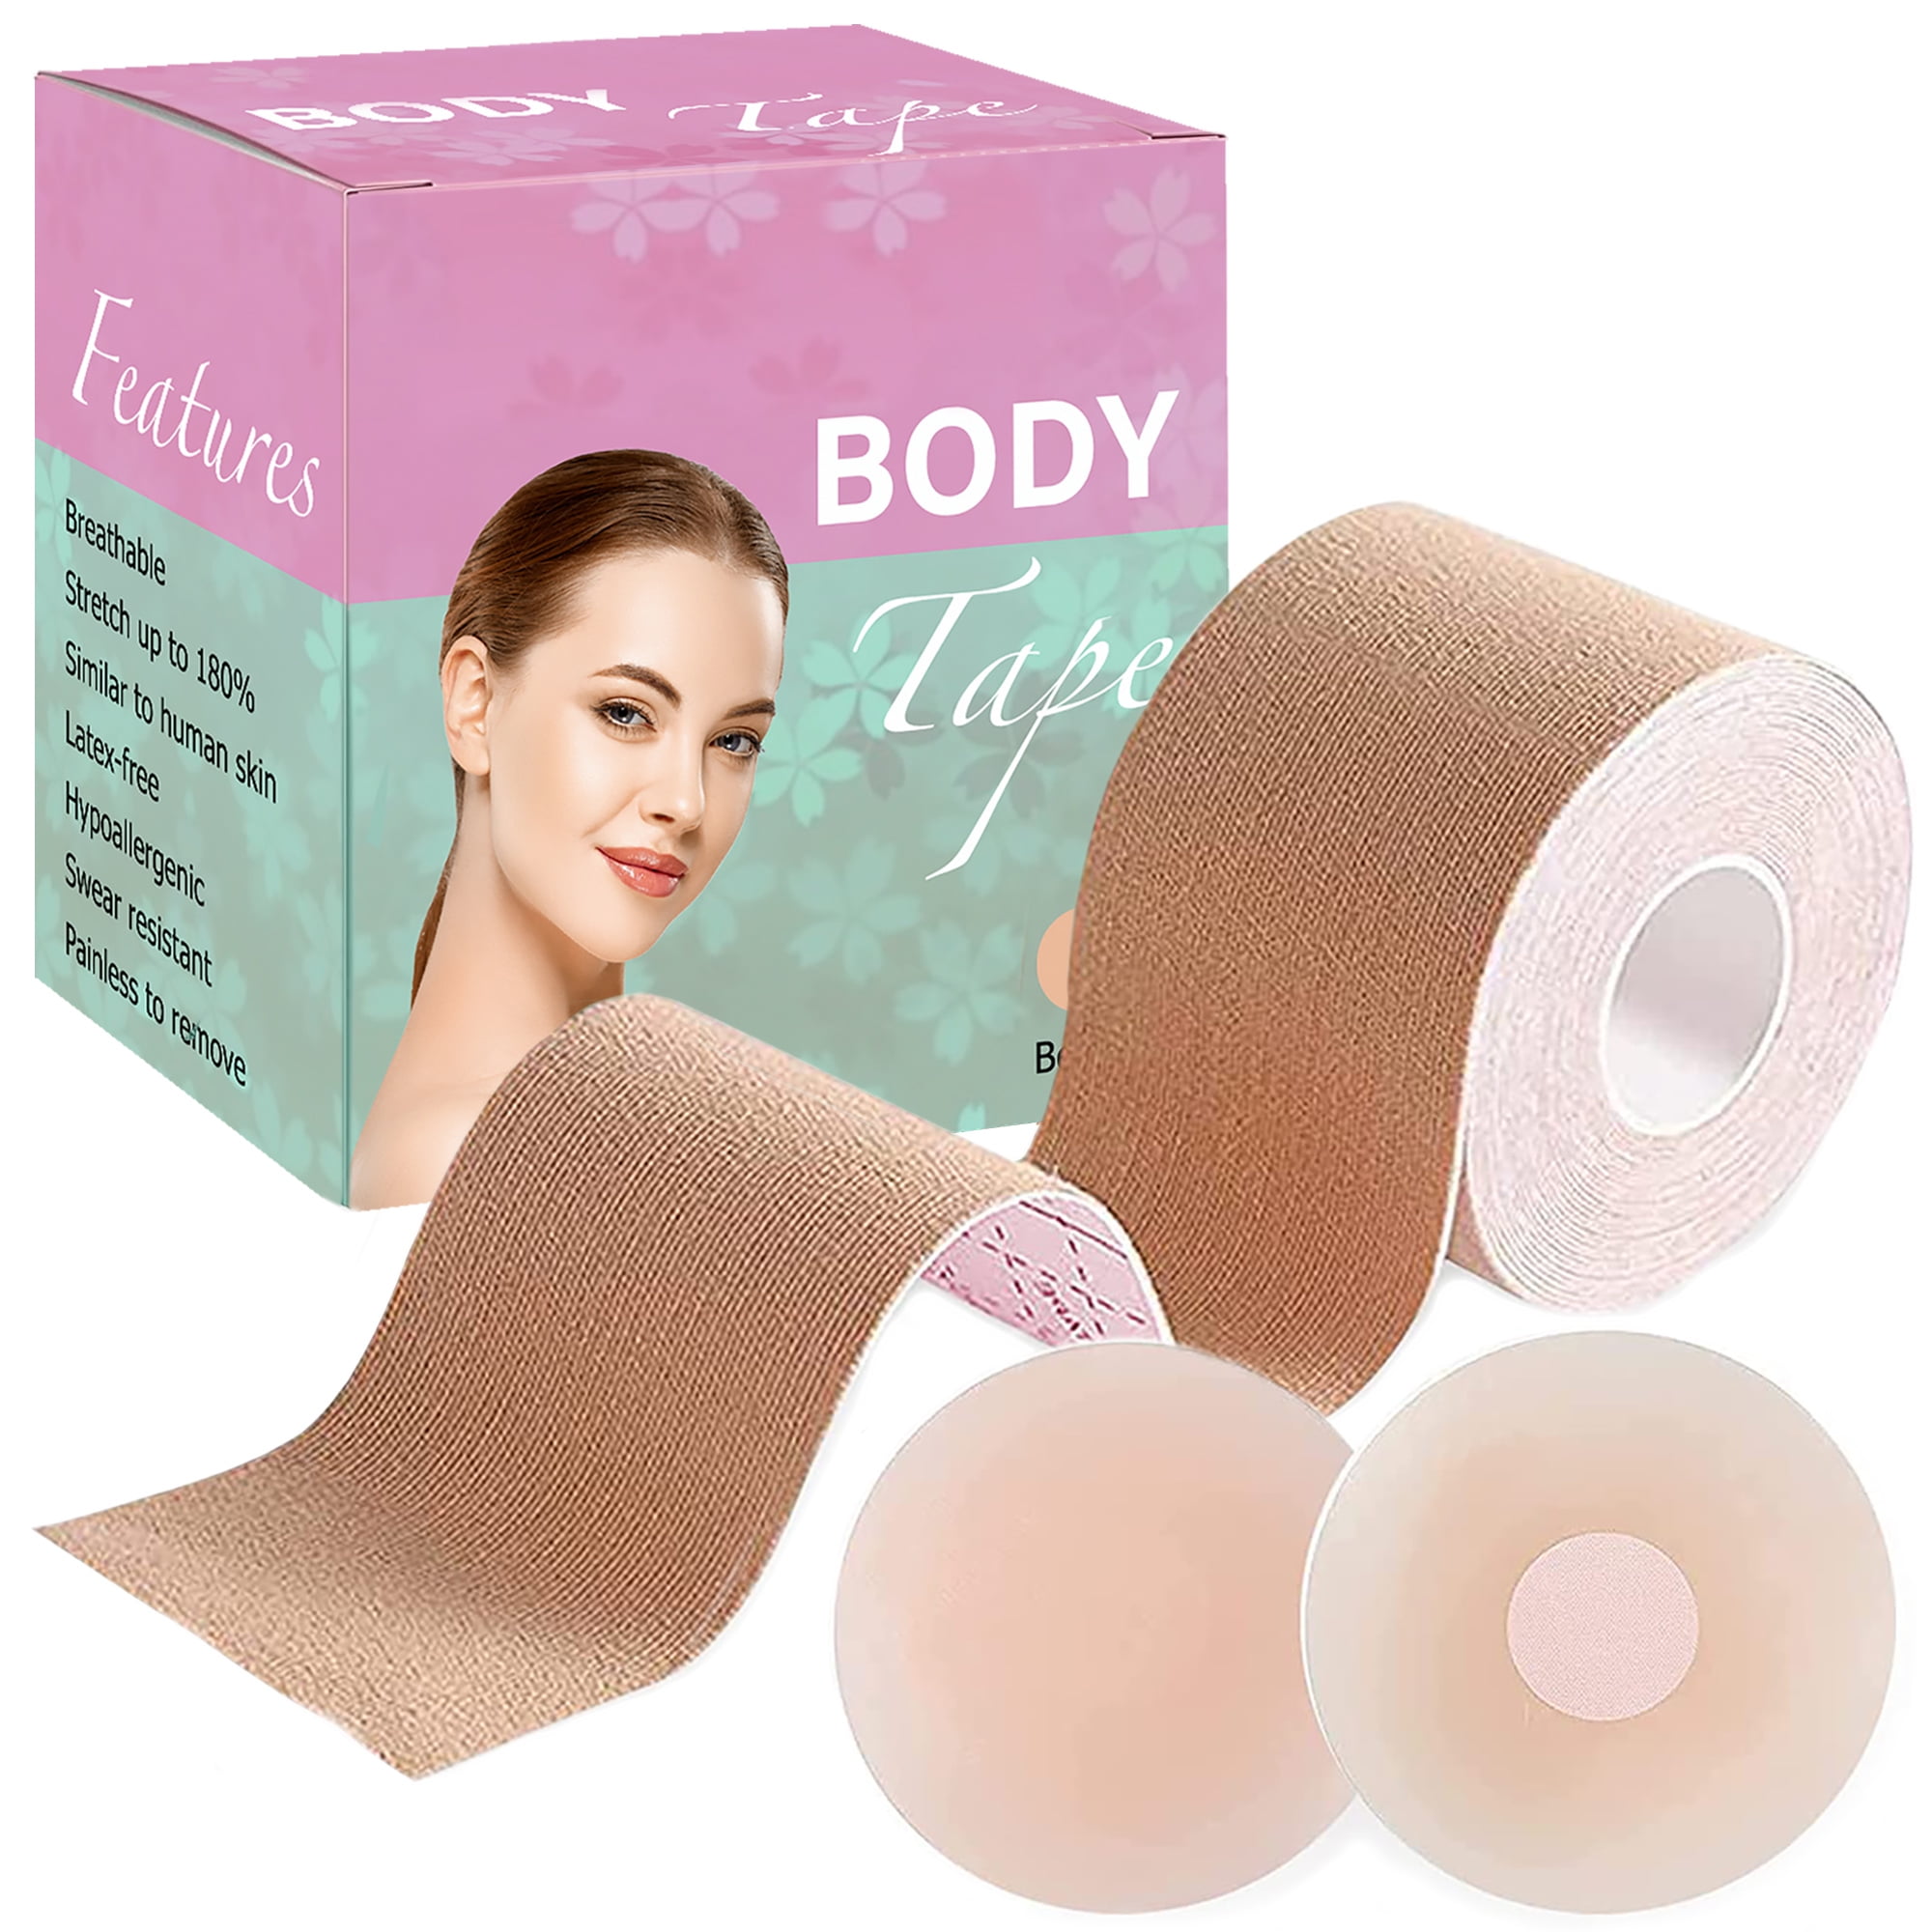 Hot Sale 5cm Adhesive Breast Lifting Bra Invisible Body Pasties